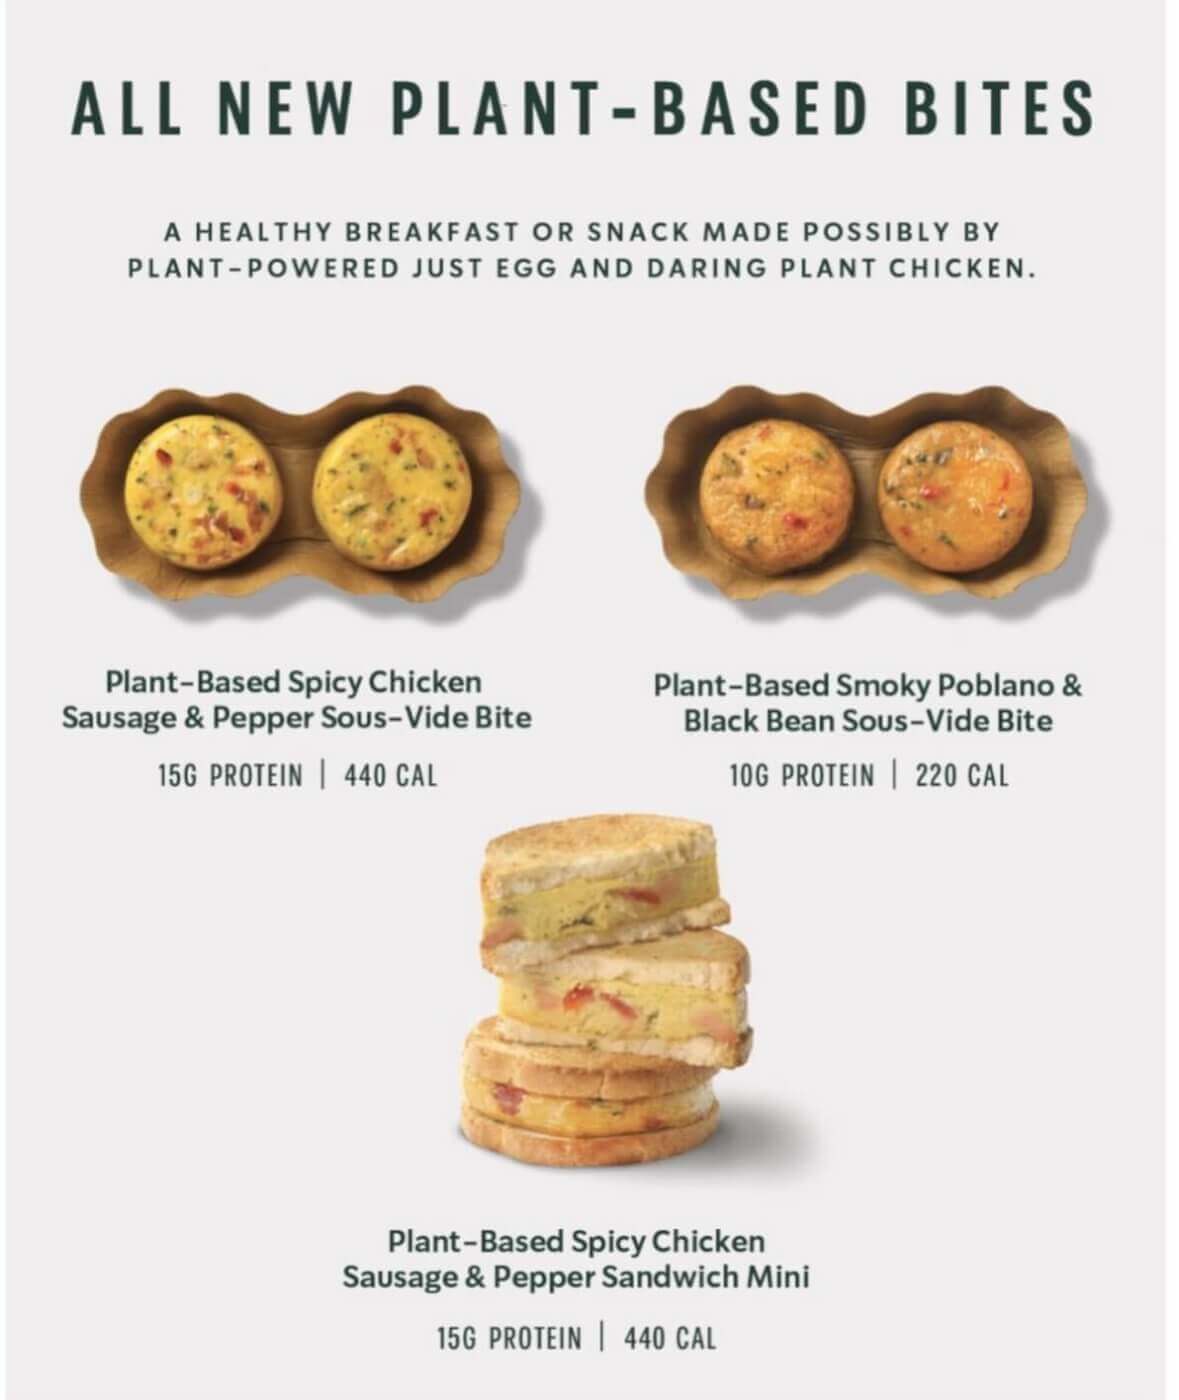 vegan fast food news 2022 with Starbucks breakfast bites including Daring Chicken and plant-based egg